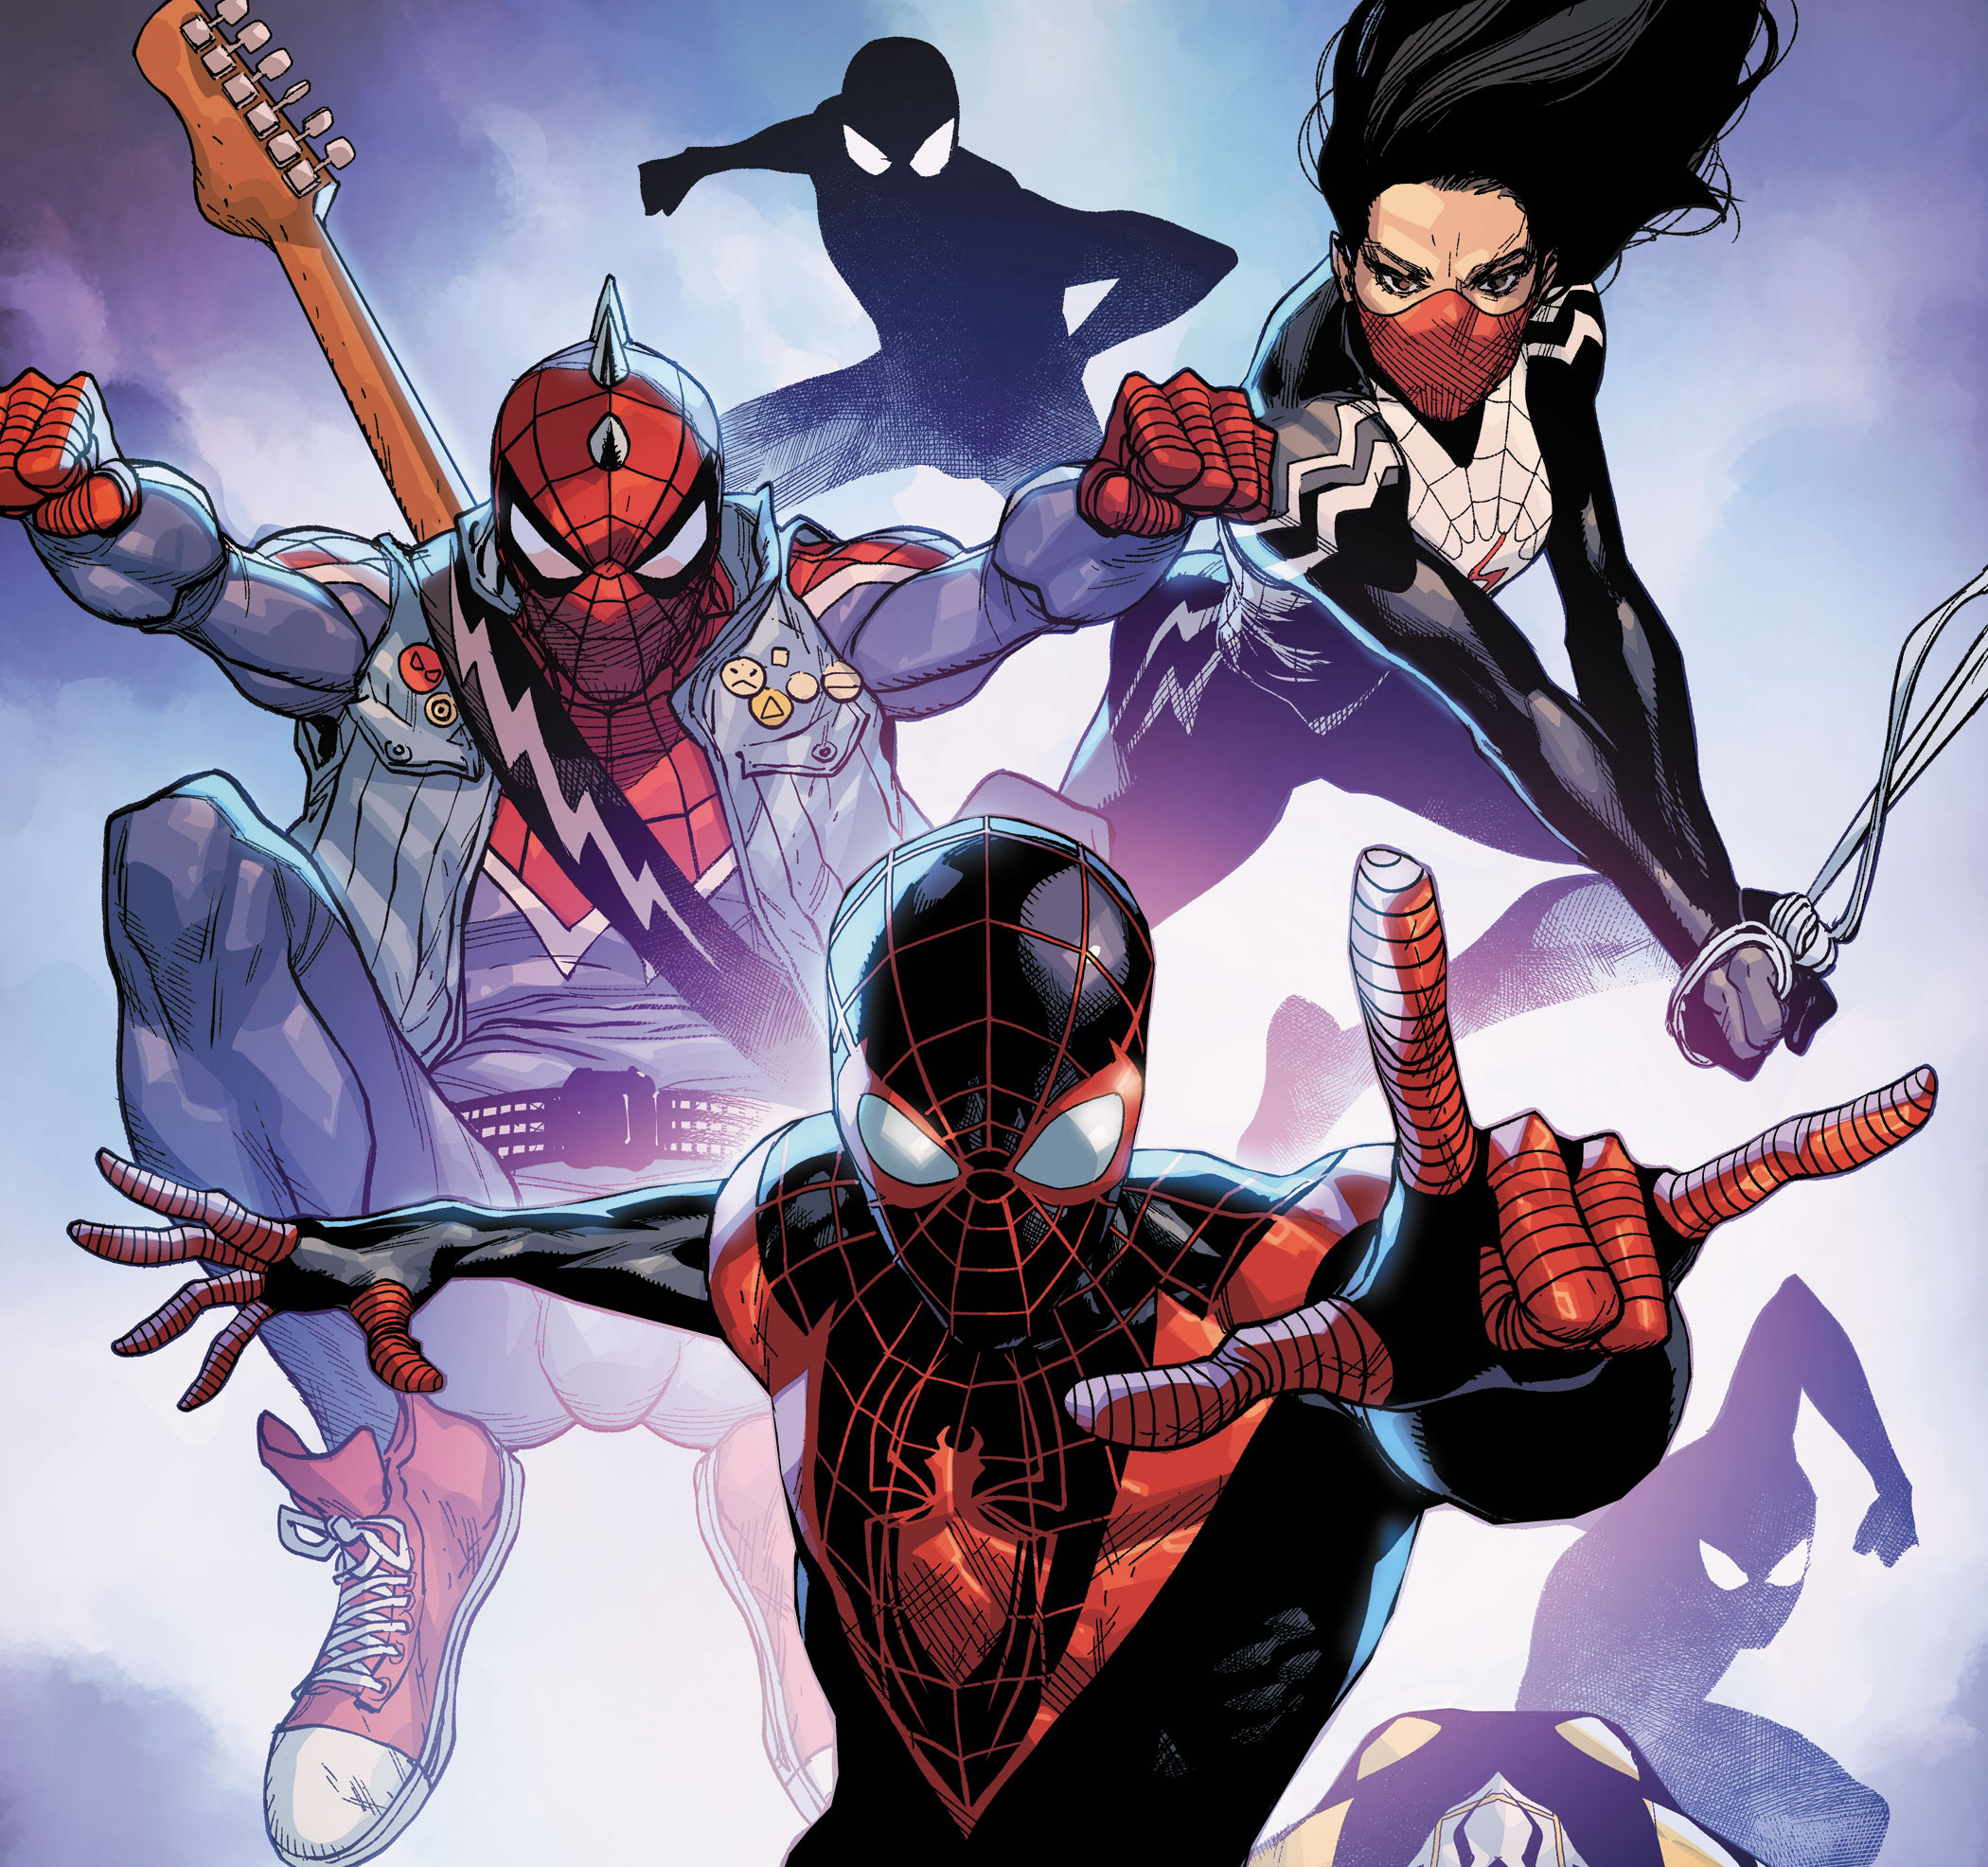 Marvel expands 'Marvel's Voices' with 'Spider-Verse' one-shot